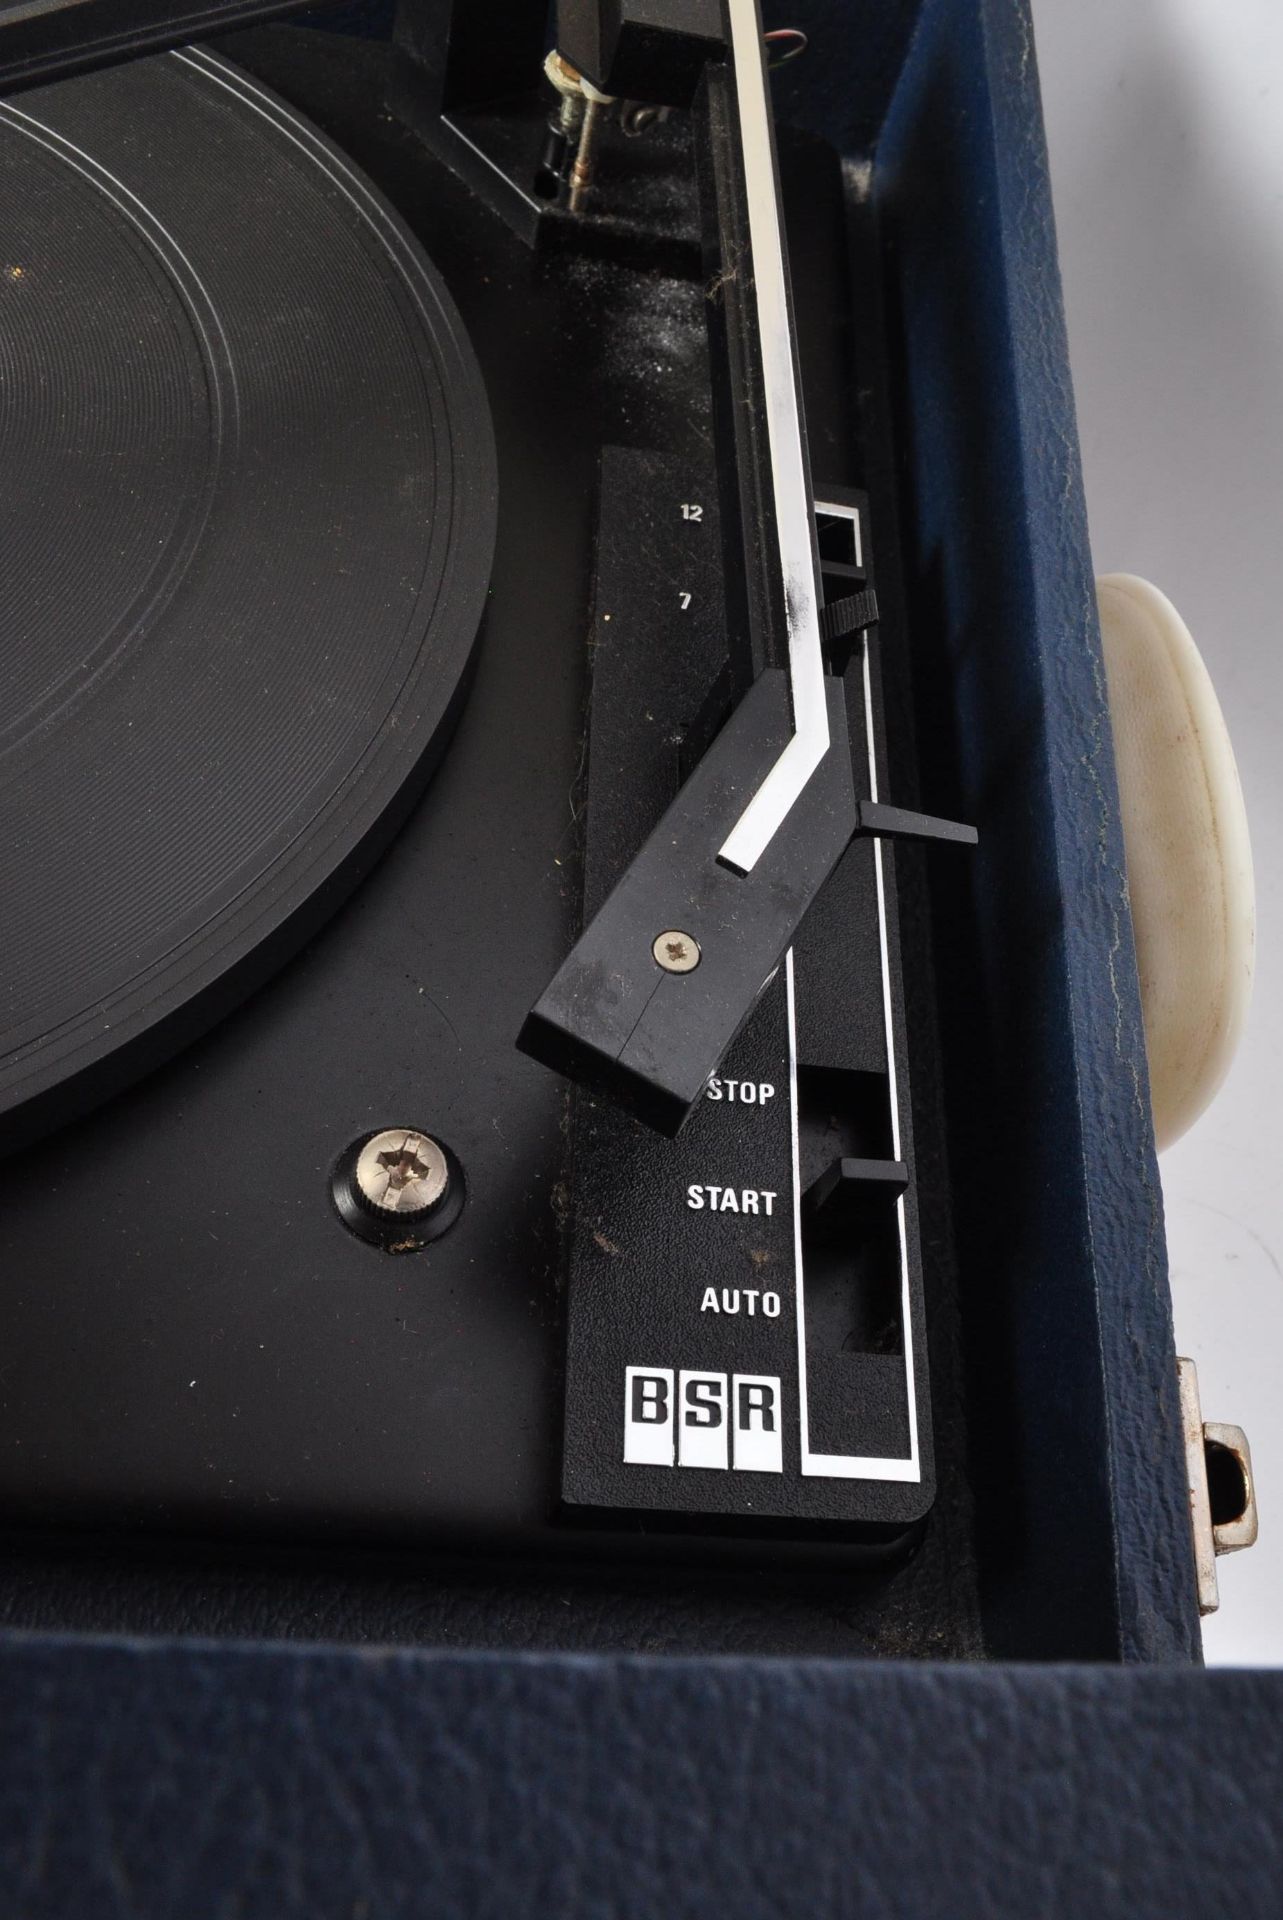 VINTAGE 1960S BSR PORTABLE TURNTABLE RECORD DECK - Image 2 of 5